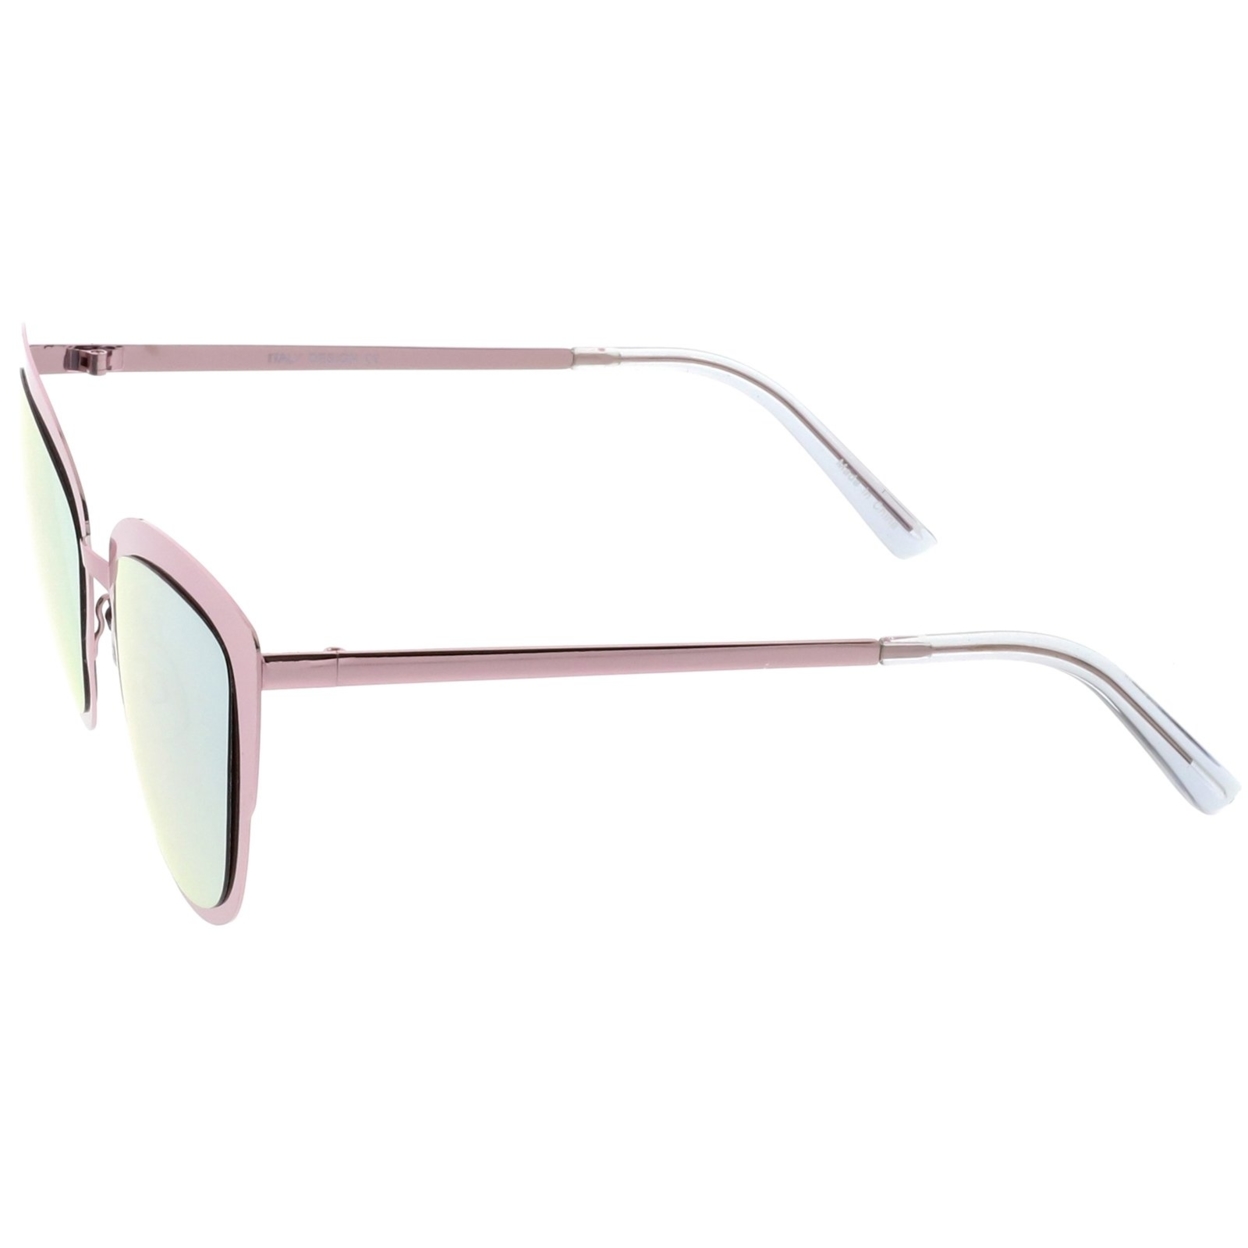 Premium Oversize Metal Cat Eye Sunglasses With Colored Mirror Lens 54mm - Gold / Silver Mirror